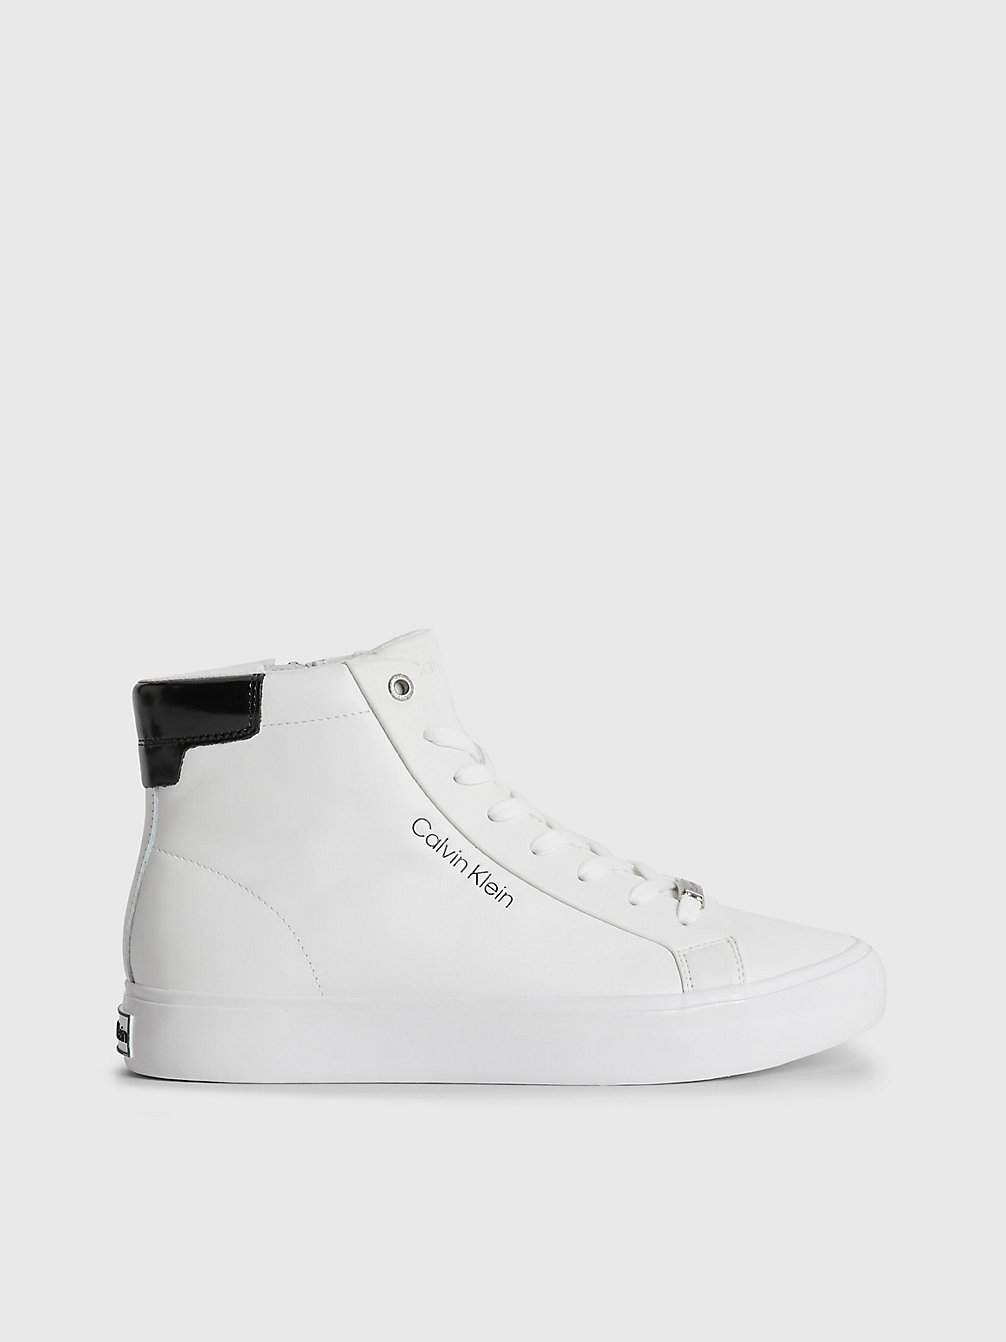 BRIGHT WHITE Leather High-Top Trainers undefined women Calvin Klein